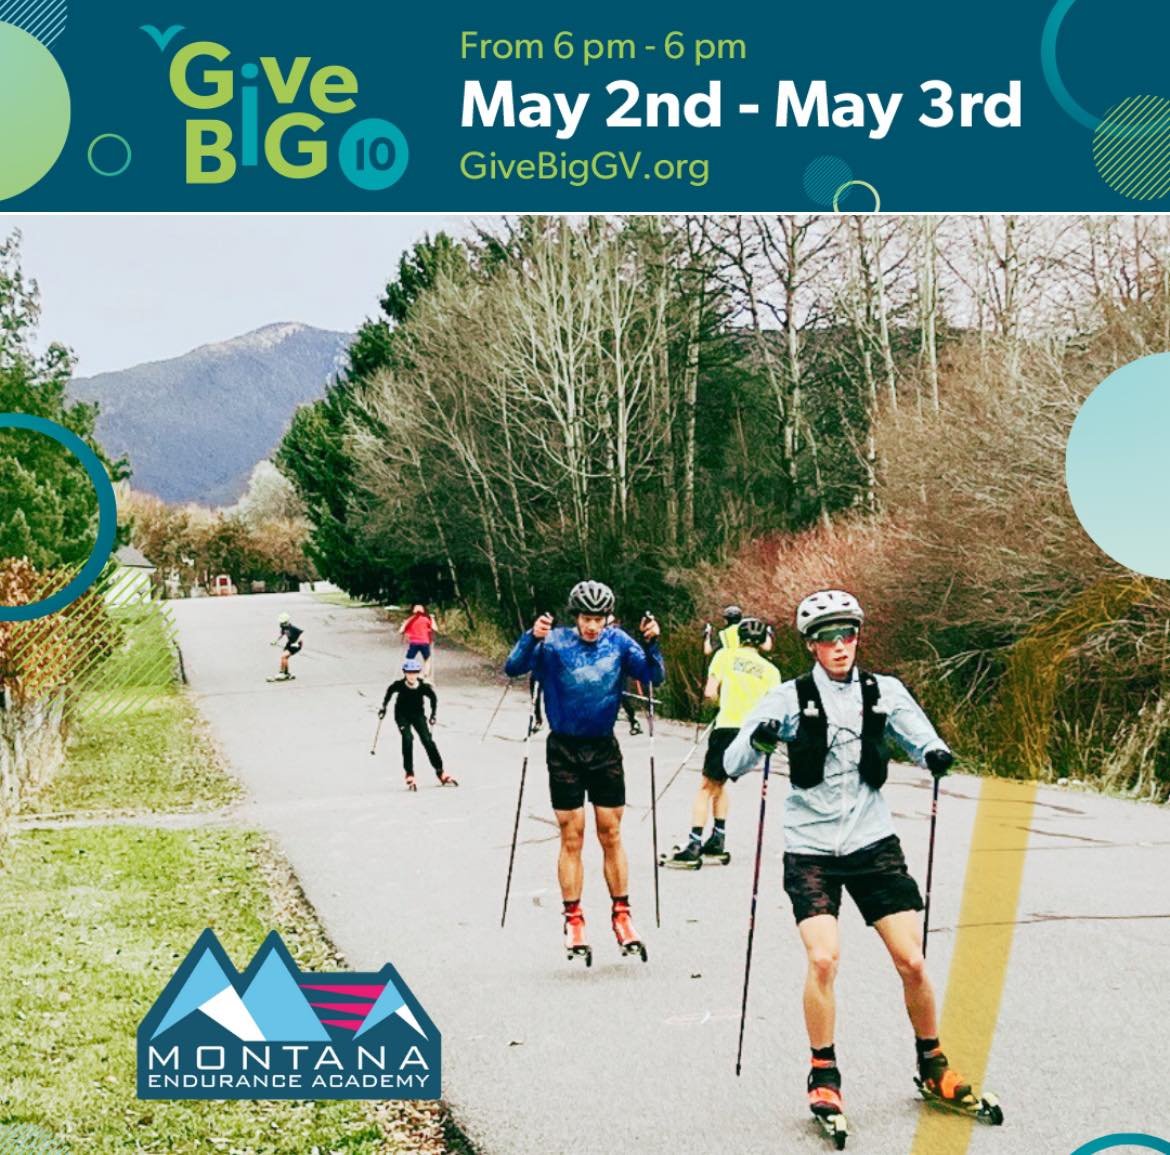 We are dedicated to providing quality programs for all ages and abilities and work hard to keep our costs affordable.
https://www.givebiggv.org/organizations/montana-endurance-academy
#mtenduranceacademy #GiveBigGV 
#nordicskiing #endurancetraining 
